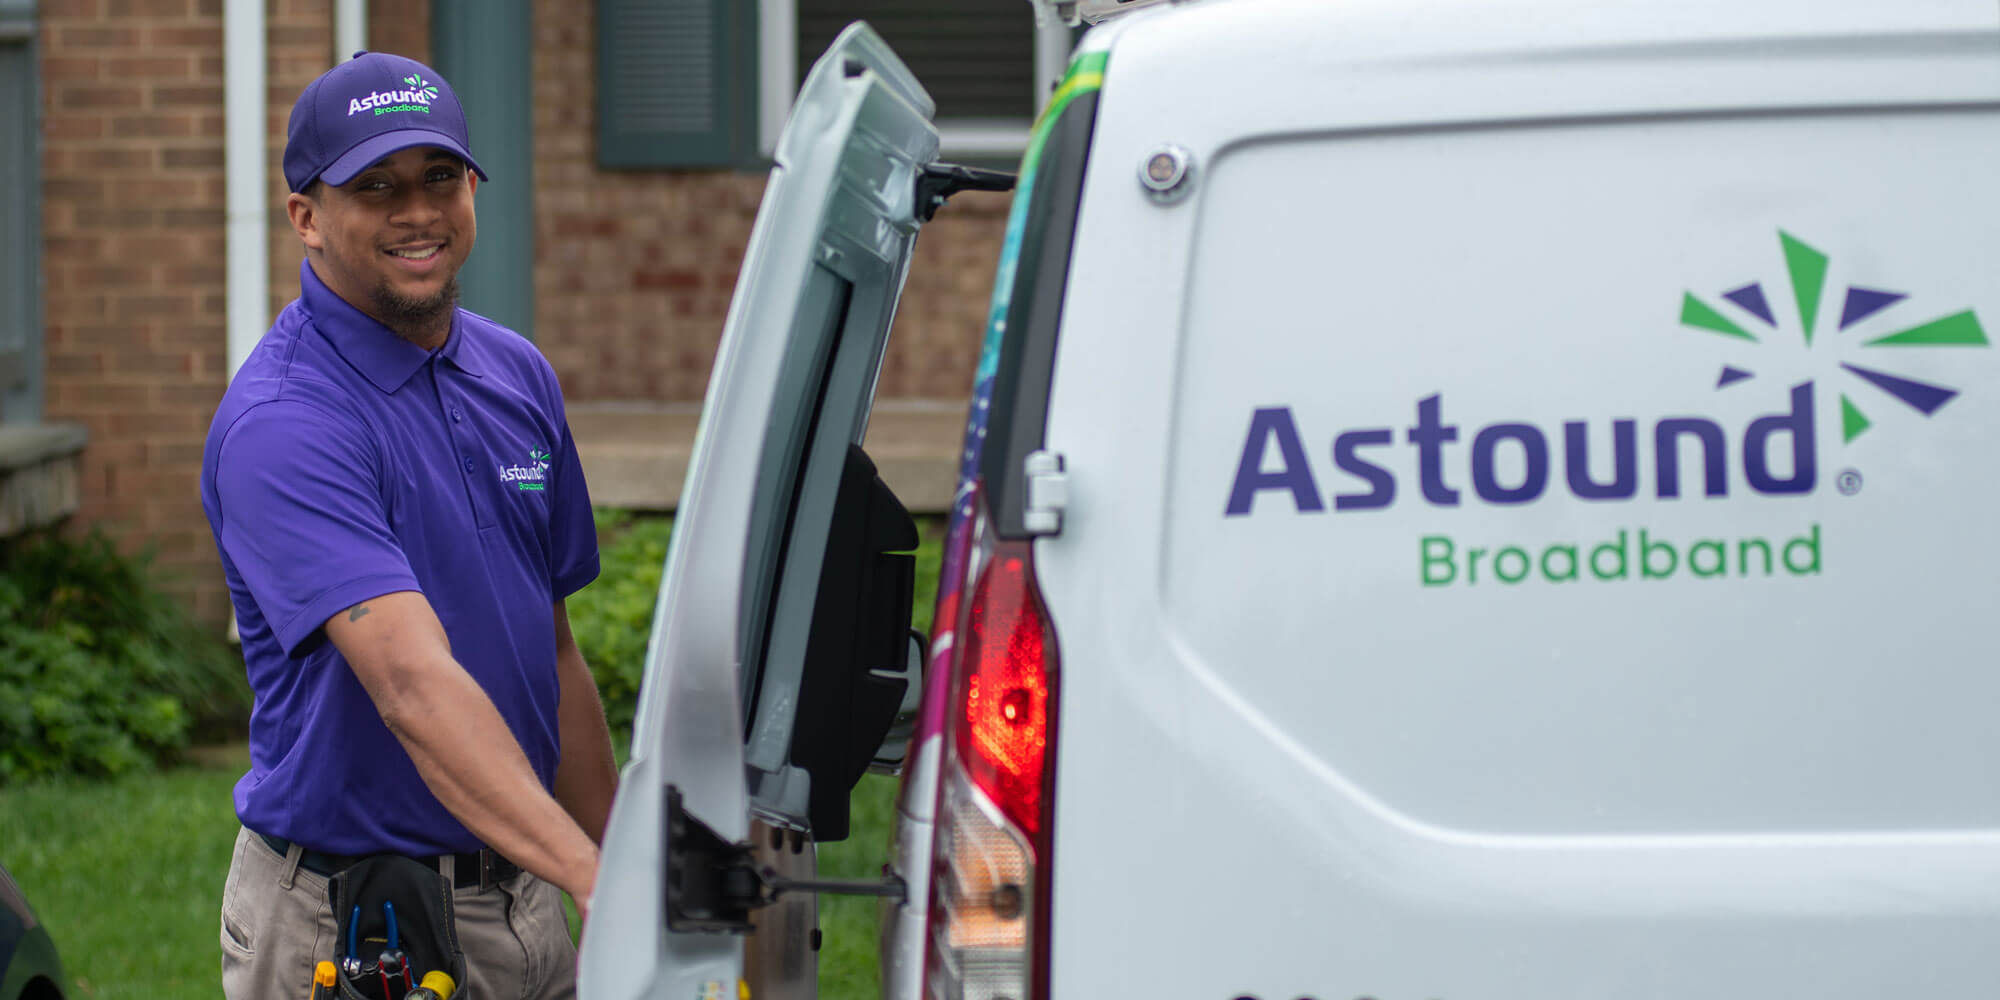 Astound Broadband for fast, reliable service.